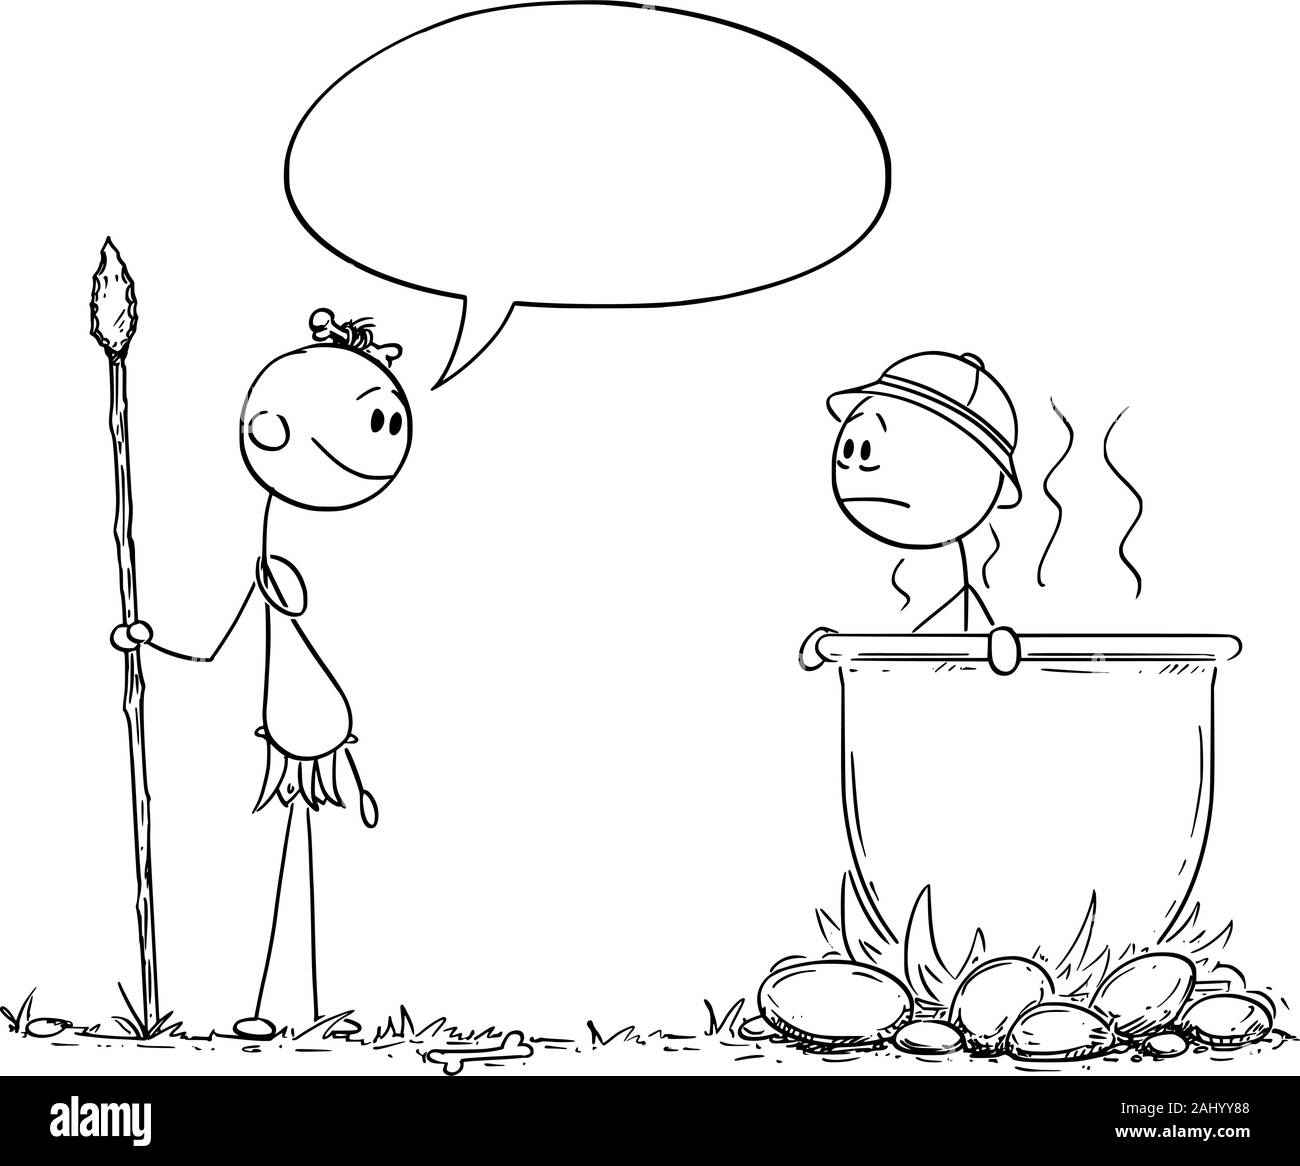 Vector cartoon stick figure drawing conceptual illustration of native cannibal man saying something, while looking at European or Western Traveler cooked in big cauldron on the fireplace. Stock Vector